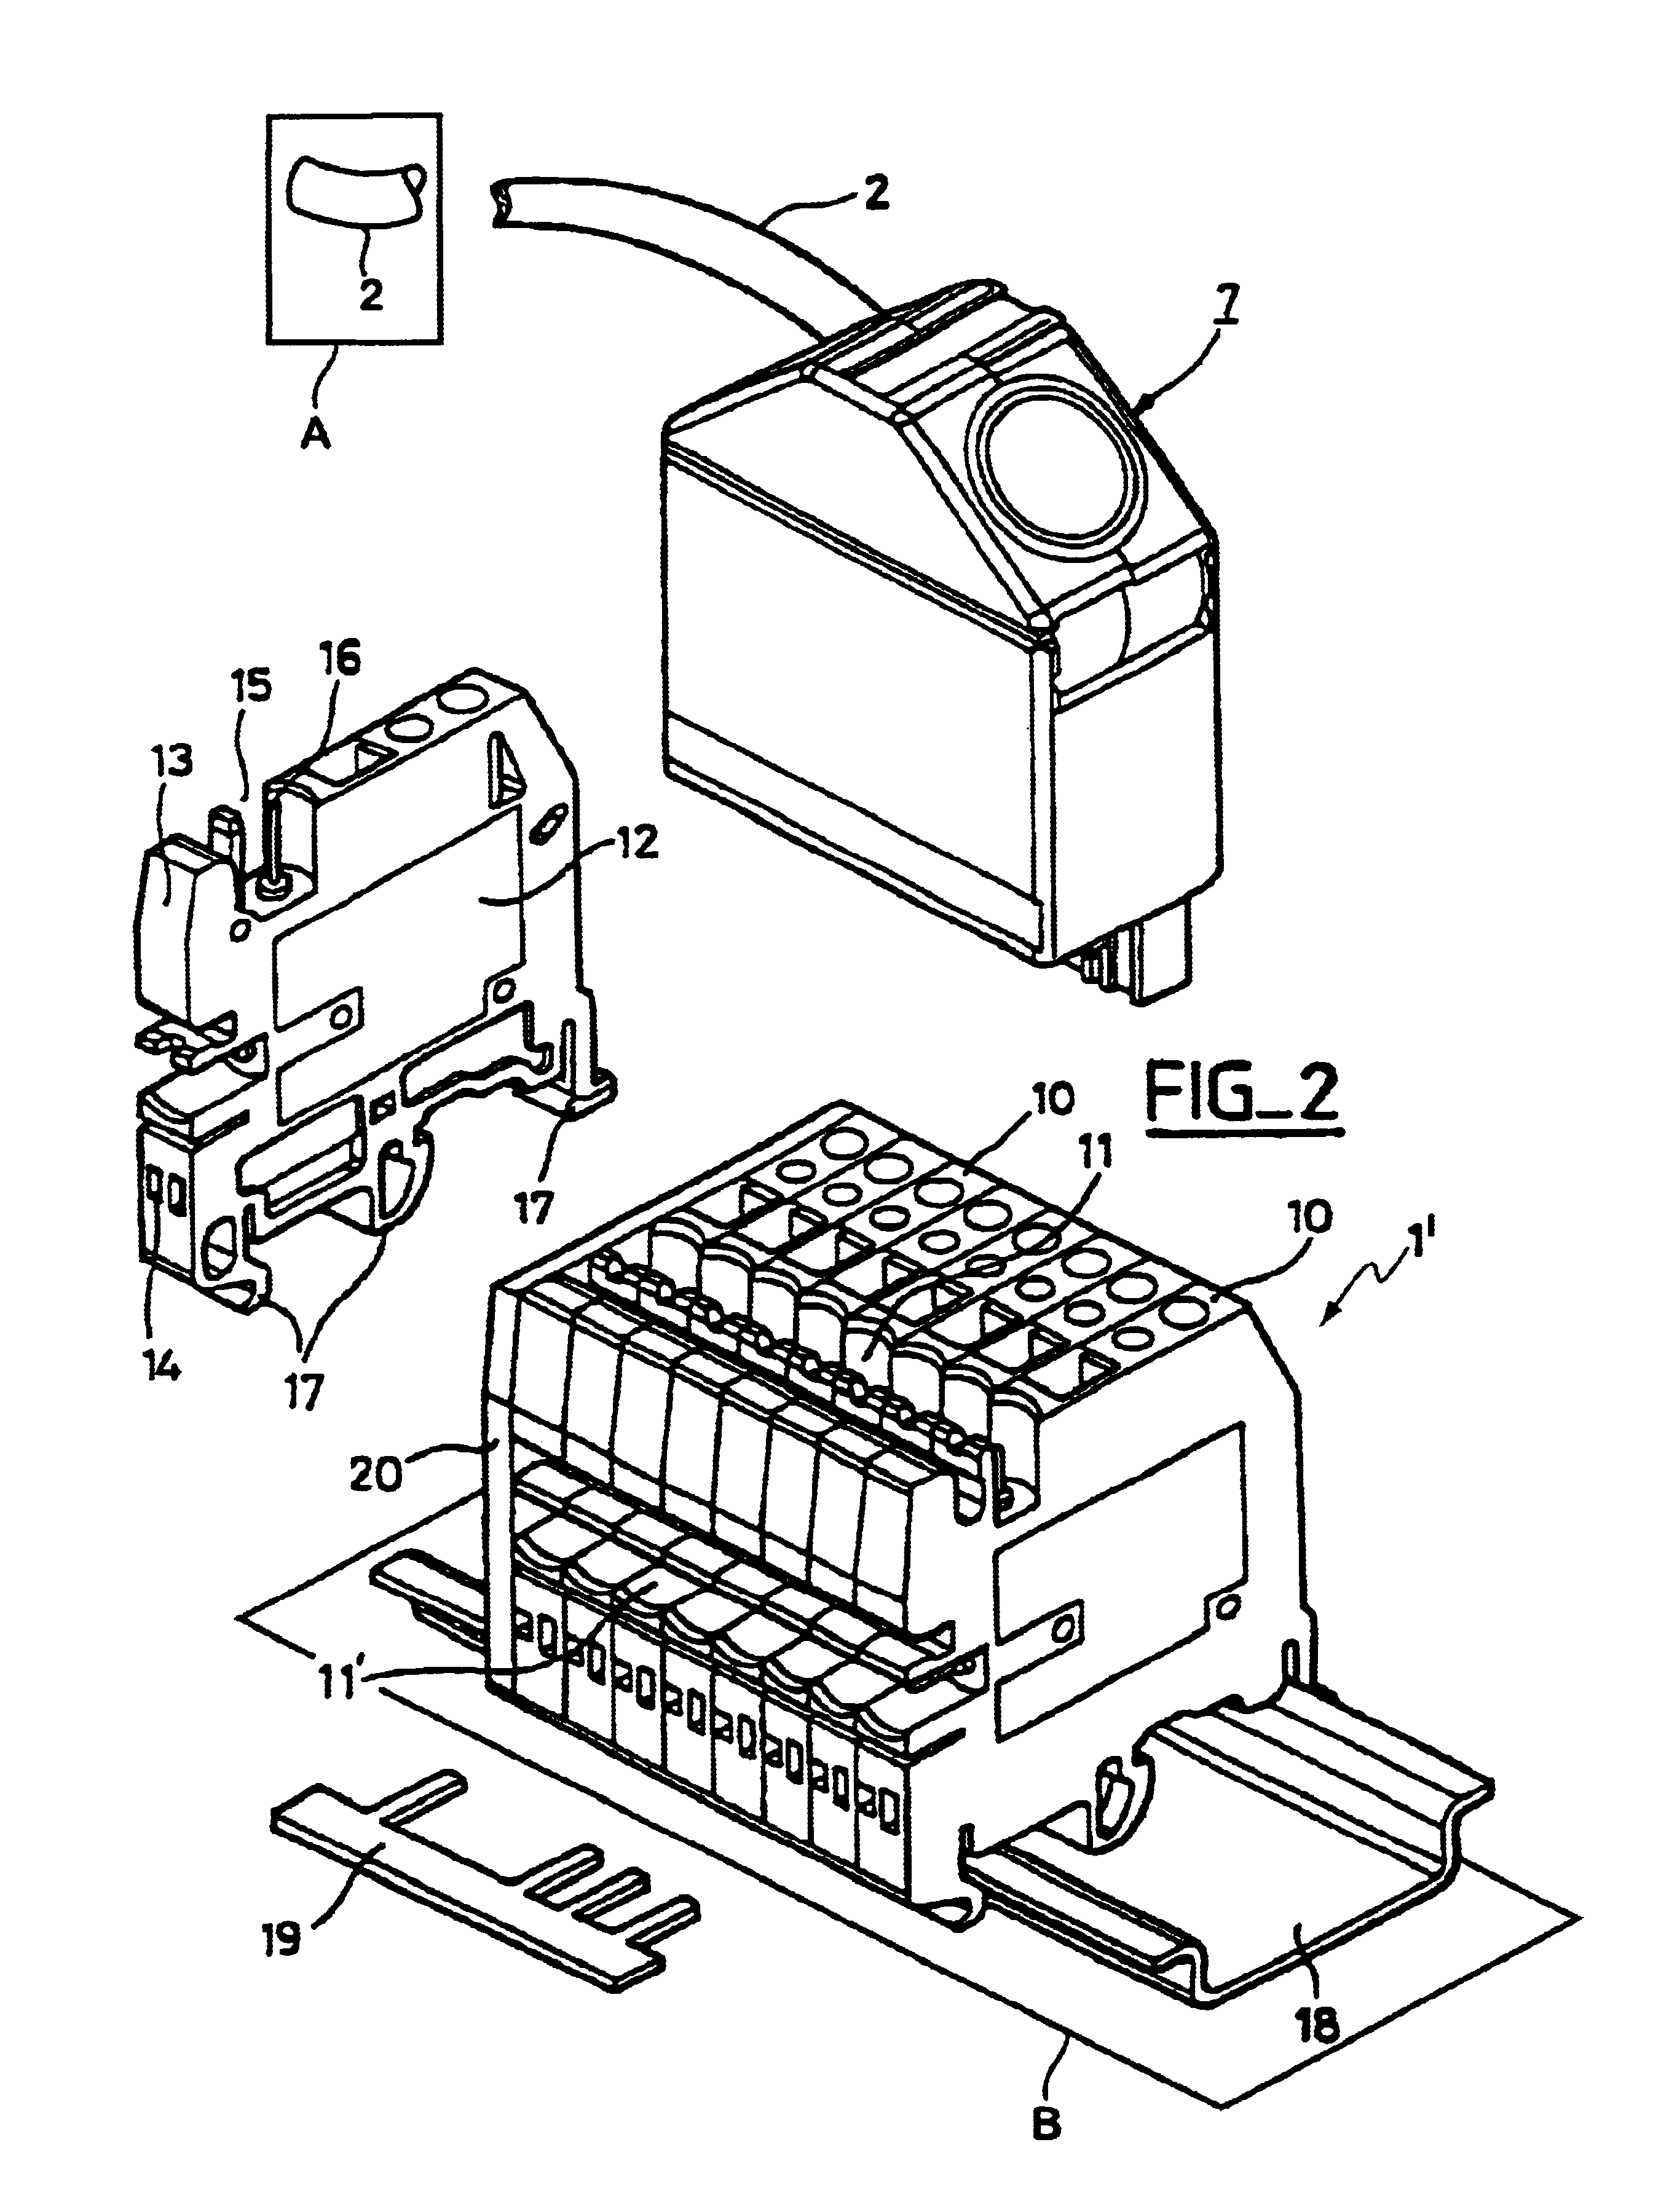 Interface device between pieces of equipment of a plant